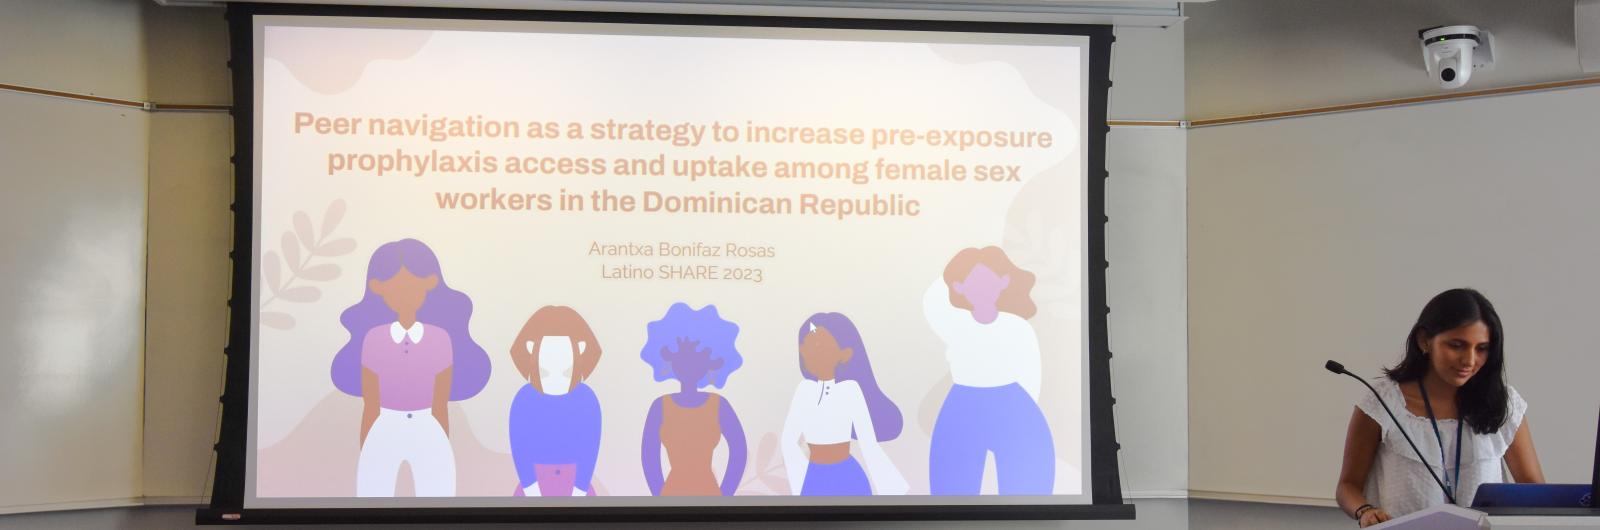 Girl next to a Slide show presentation that says "Peer Navigation as a strategy to increase pre-exposure prophylaxis access and uptake among female sex workers in the Dominican Republic" 